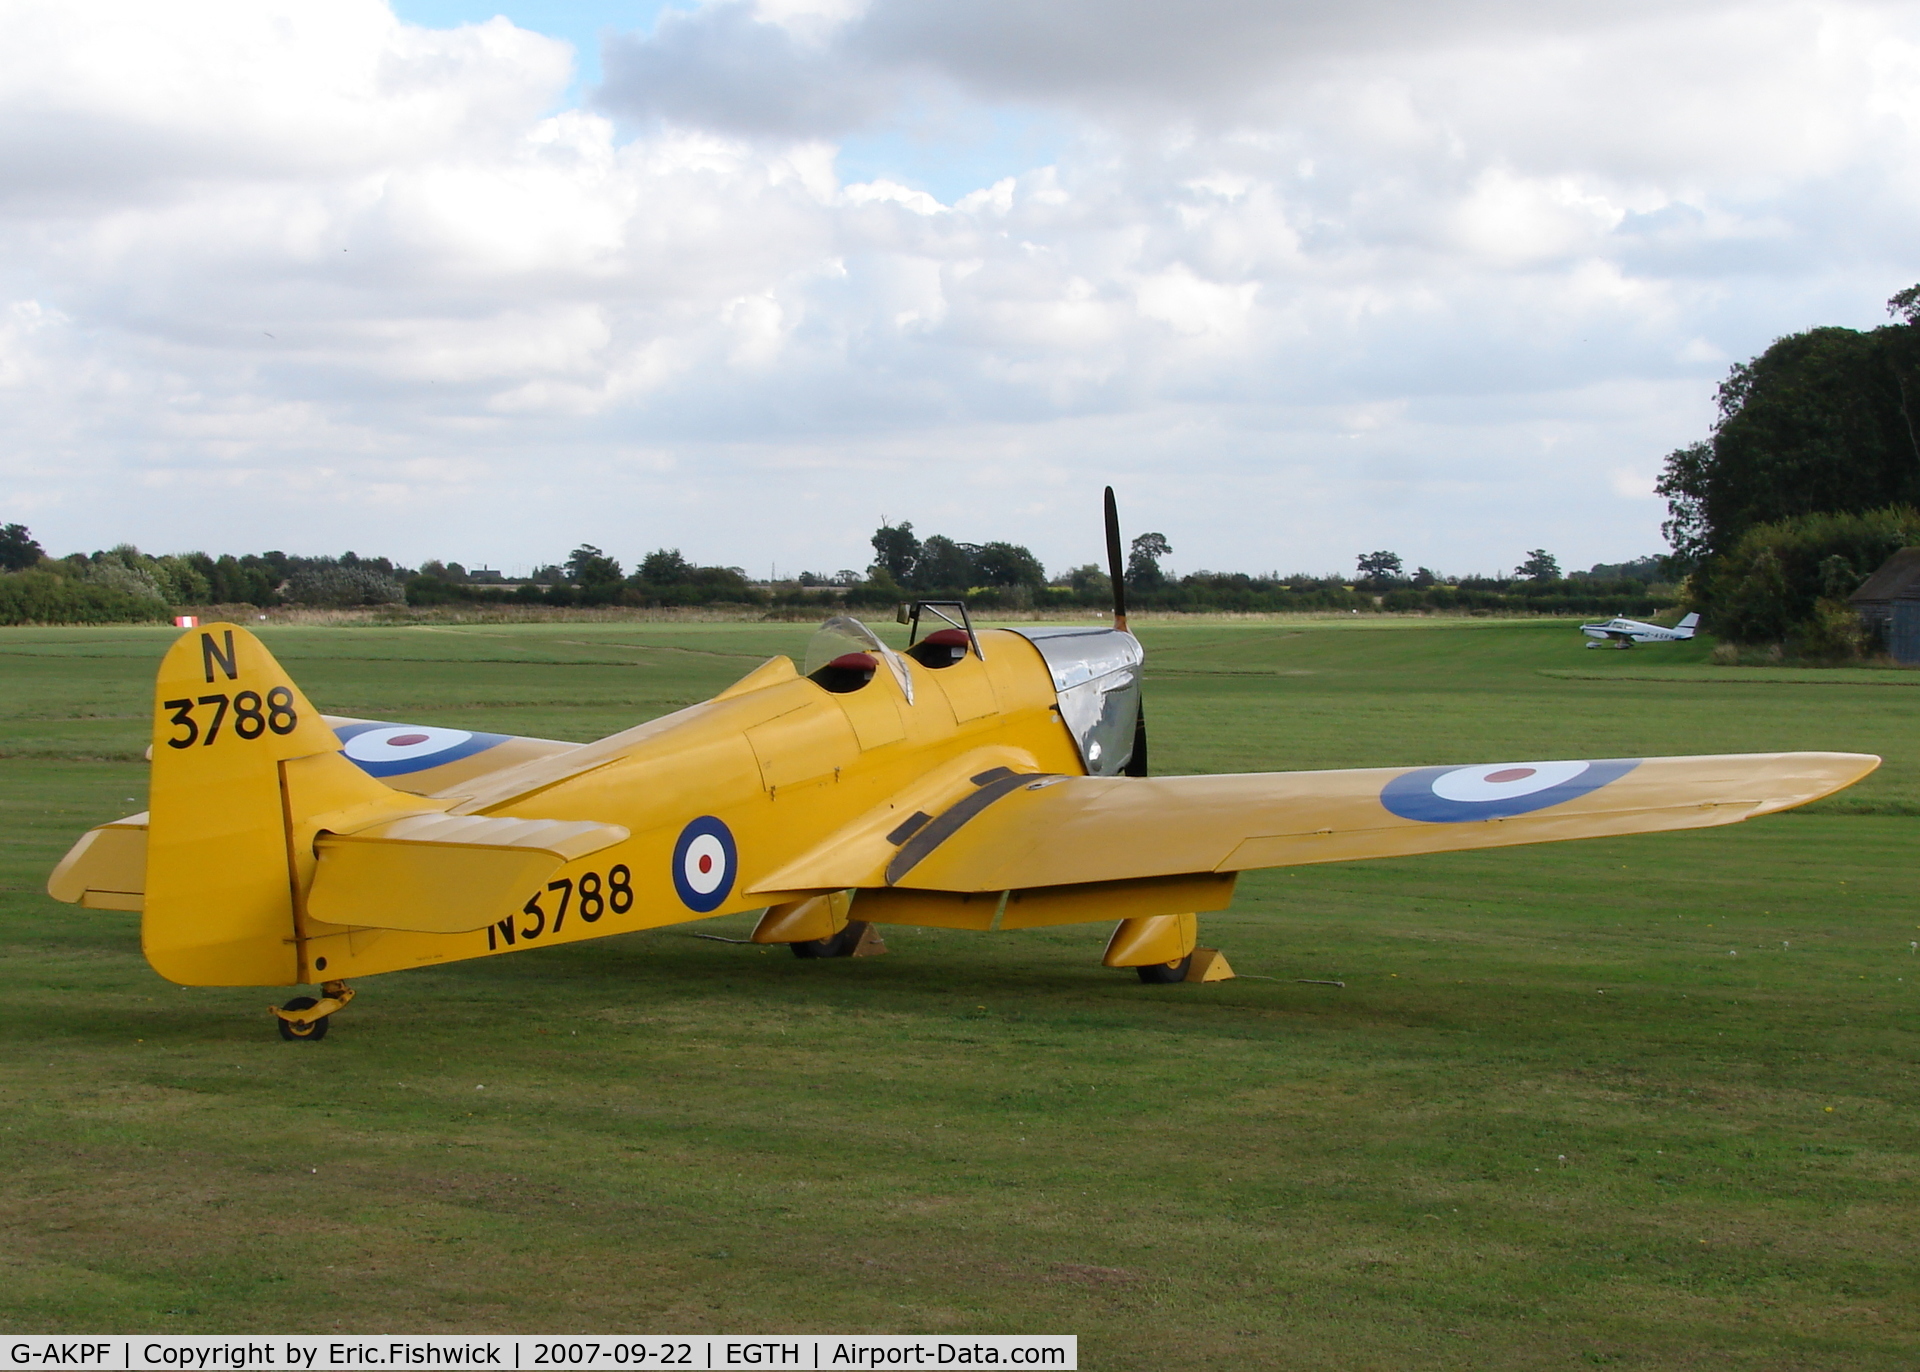 G-AKPF, 1941 Miles M14A Hawk Trainer 3 C/N 2228, 2. N3788 at Shuttleworth Collection Air Display